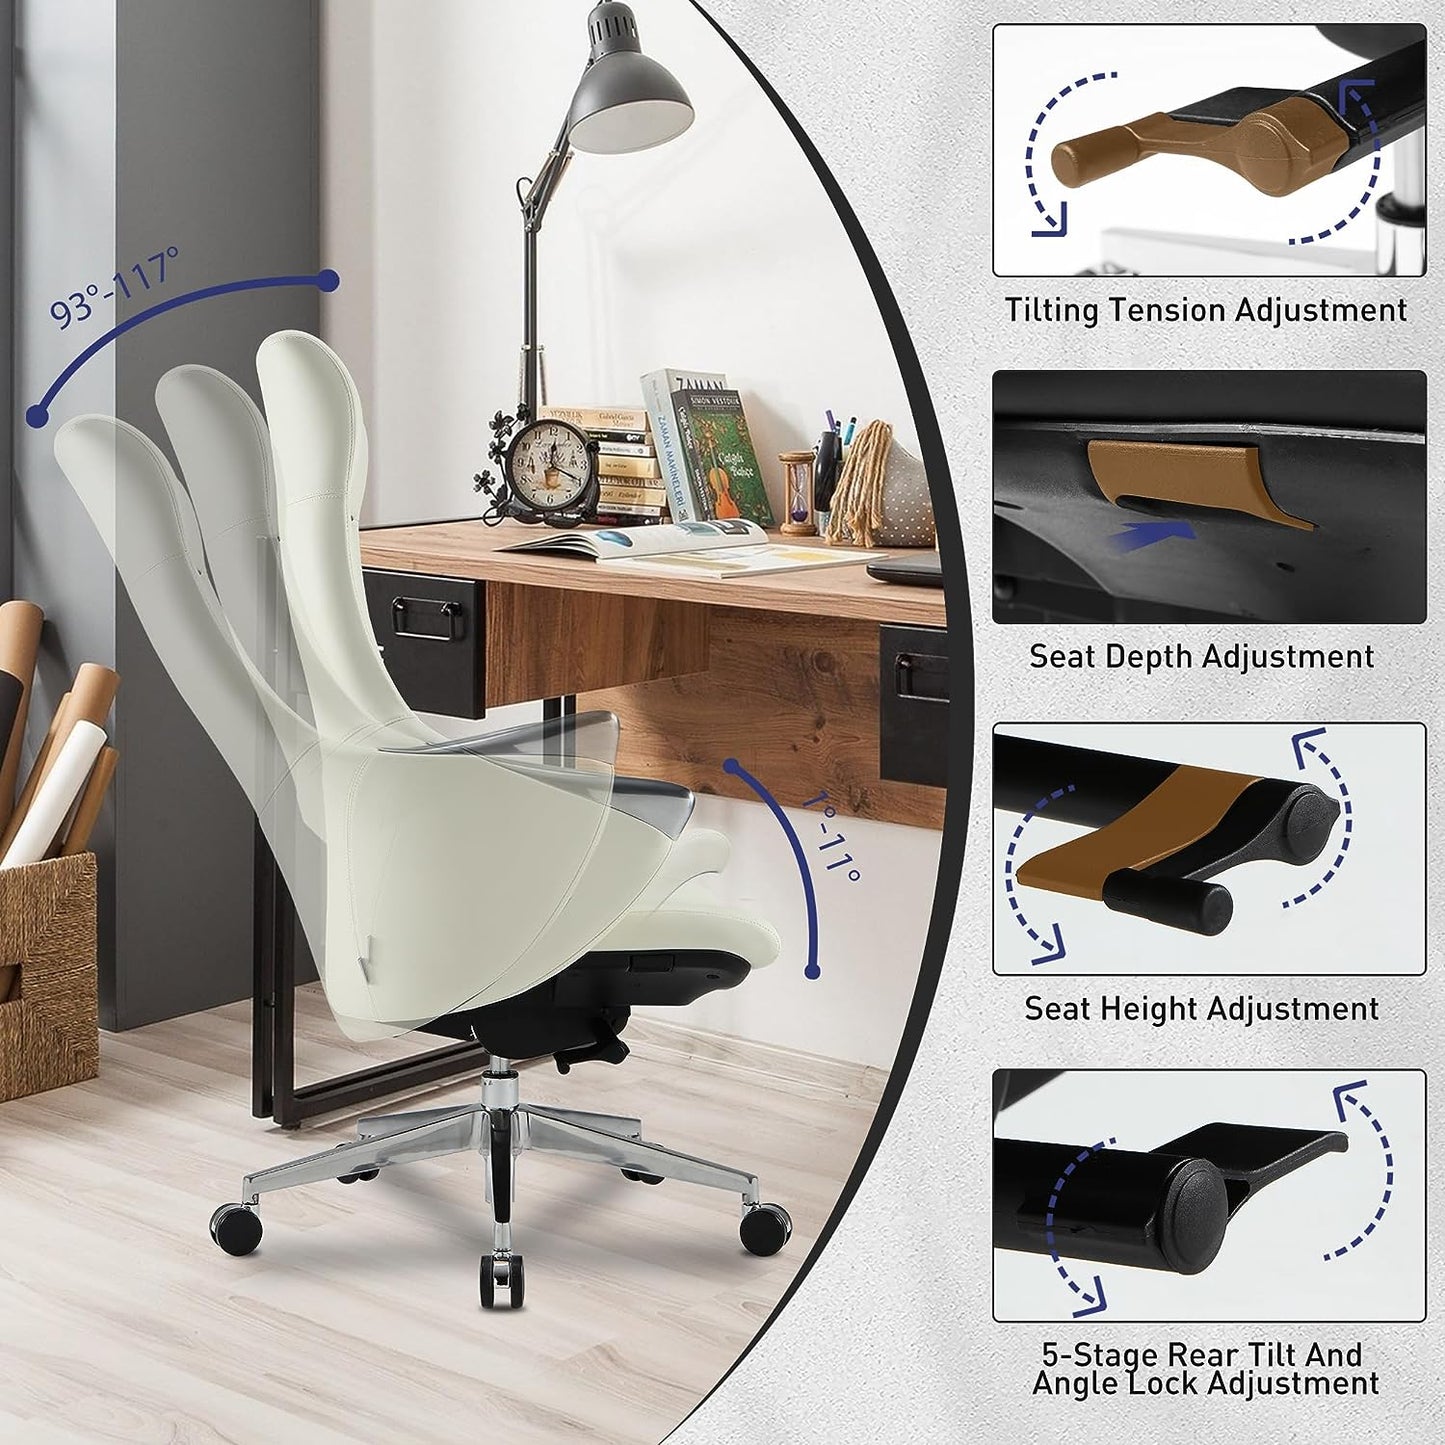 Executive Ergonomic Leather Office Chairs with Tilt and Height Adjustable, White With Headrest